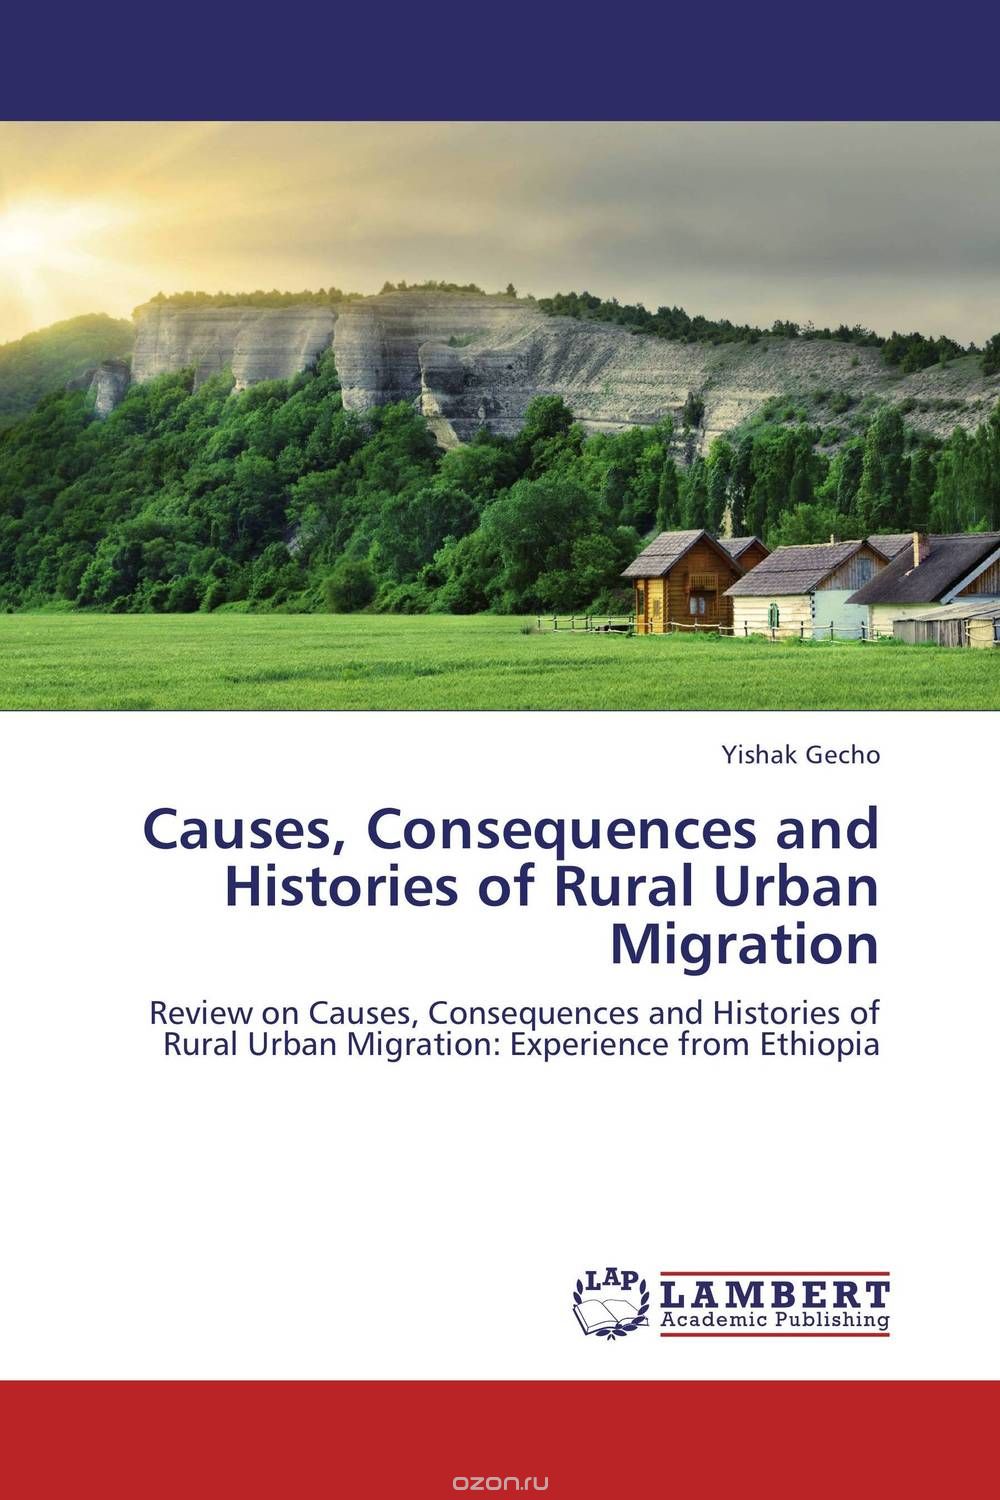 Causes, Consequences and Histories of Rural Urban Migration